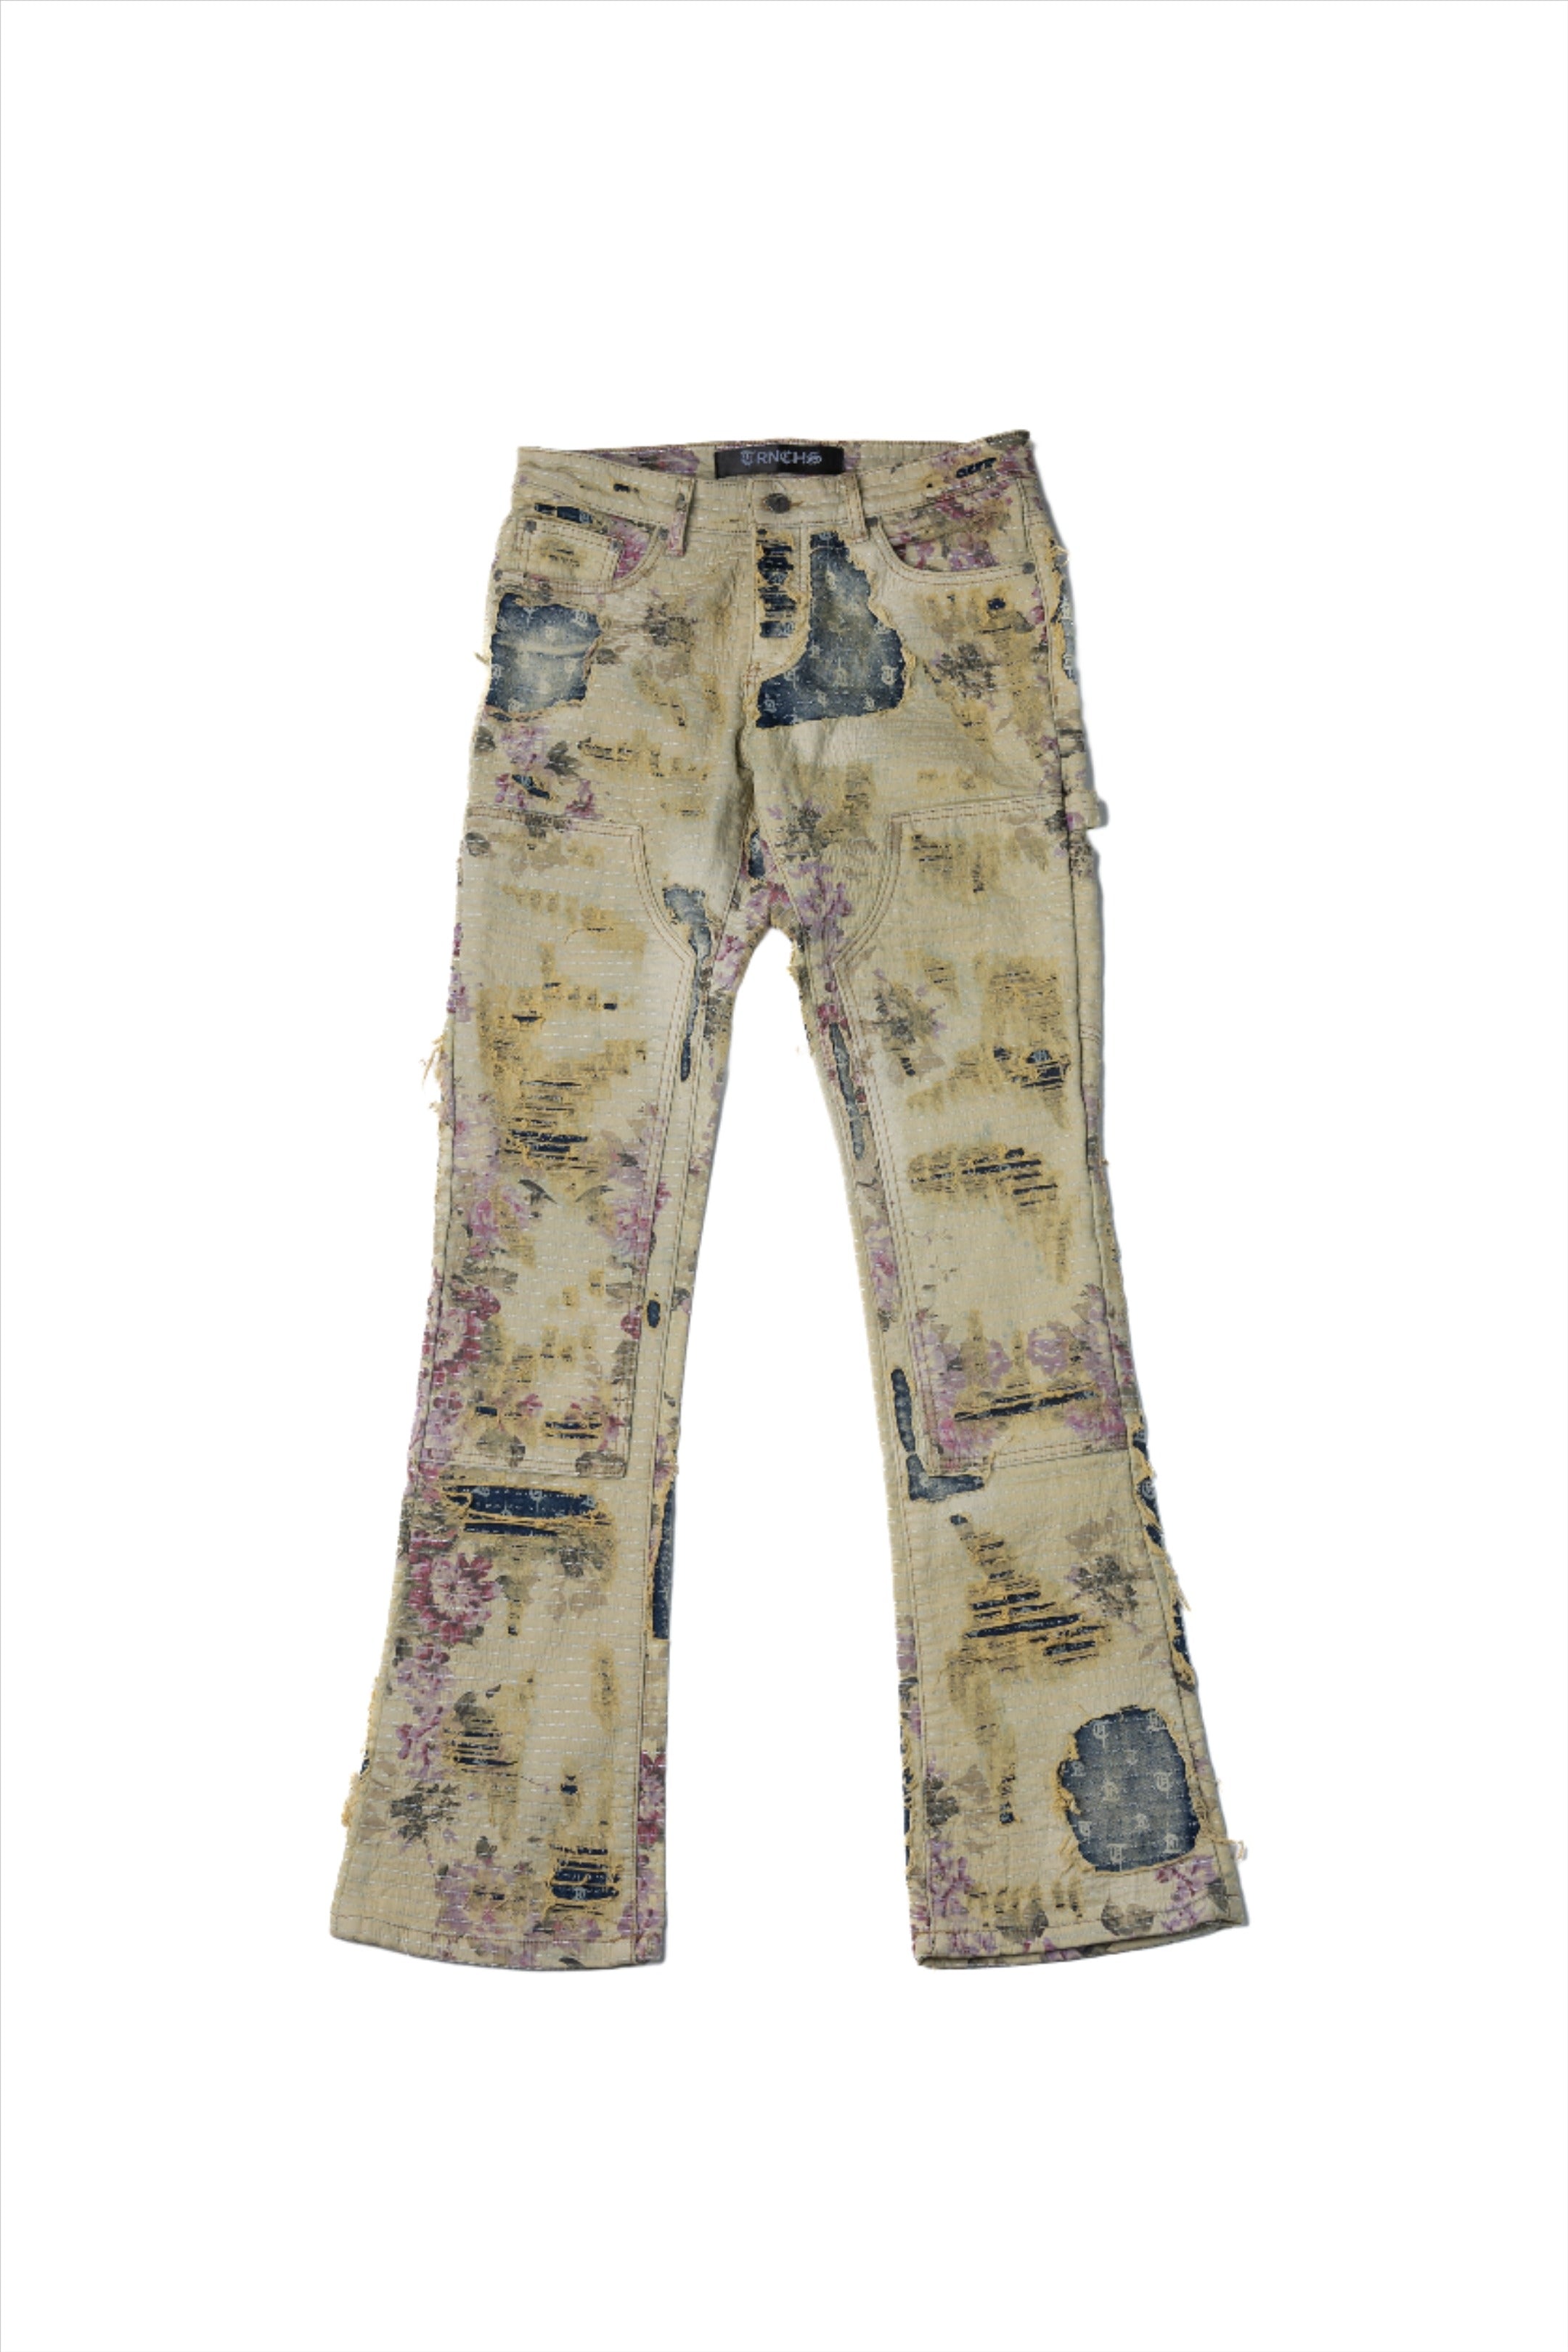 "THE GARDENER" Stacked Blue/Yellow Jeans